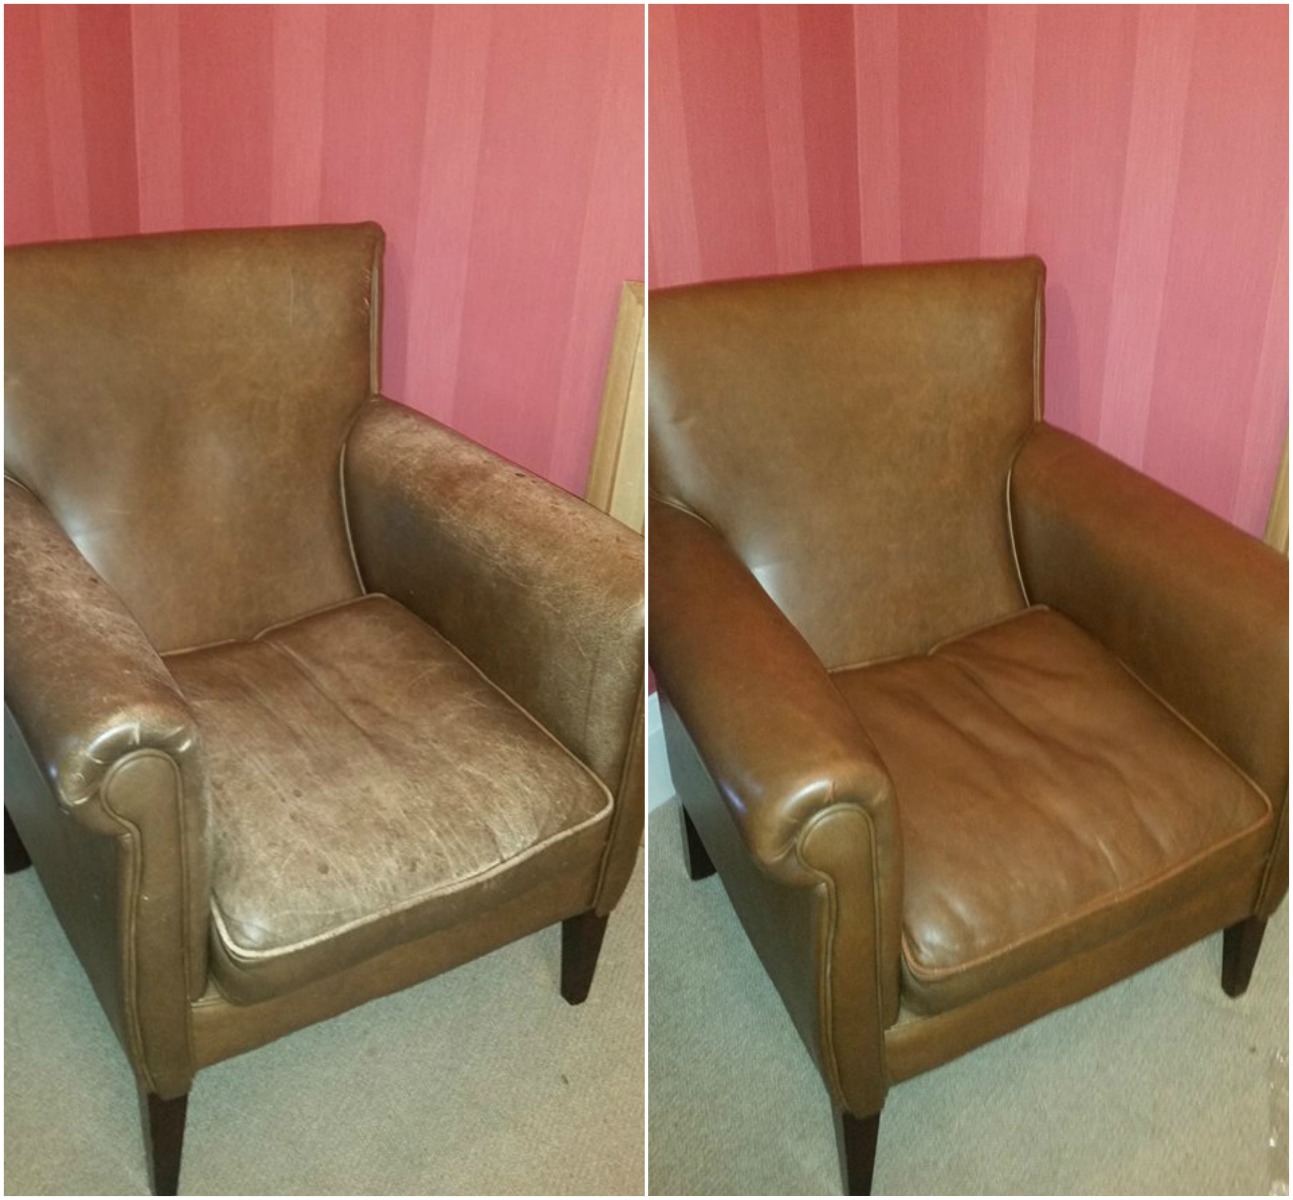 Restoring Colour To A Faded Leather Sofa, Sun Damaged Leather Couch